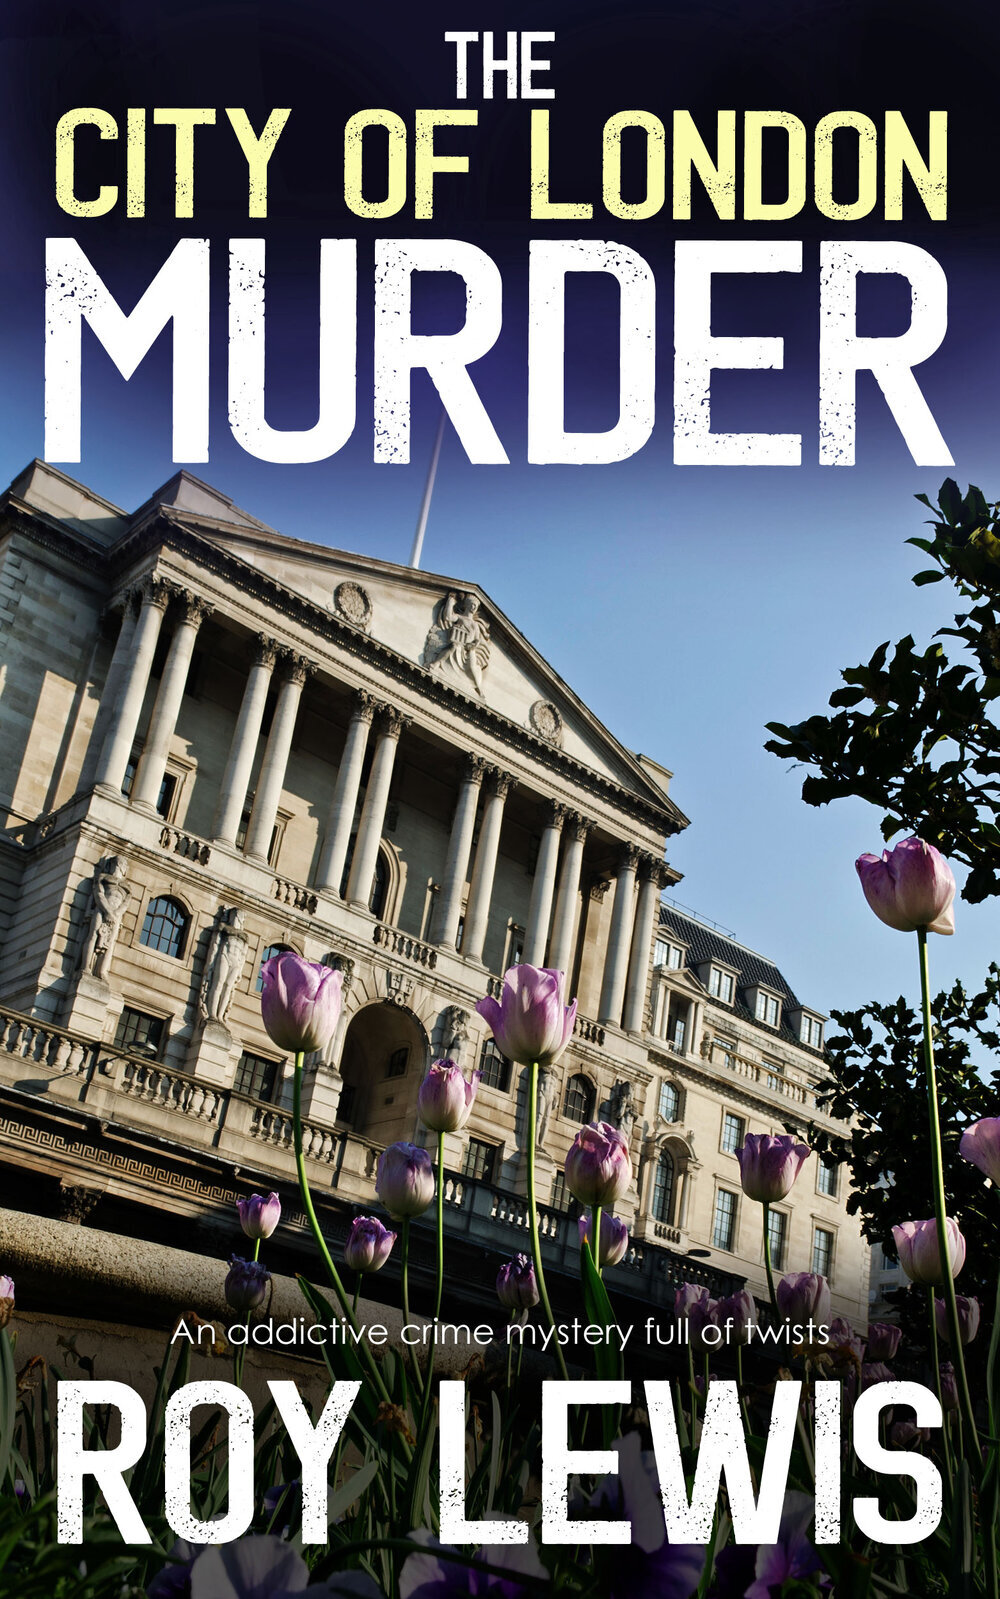 The+City+of+London+Murder+PUBLISH+COVER.jpg